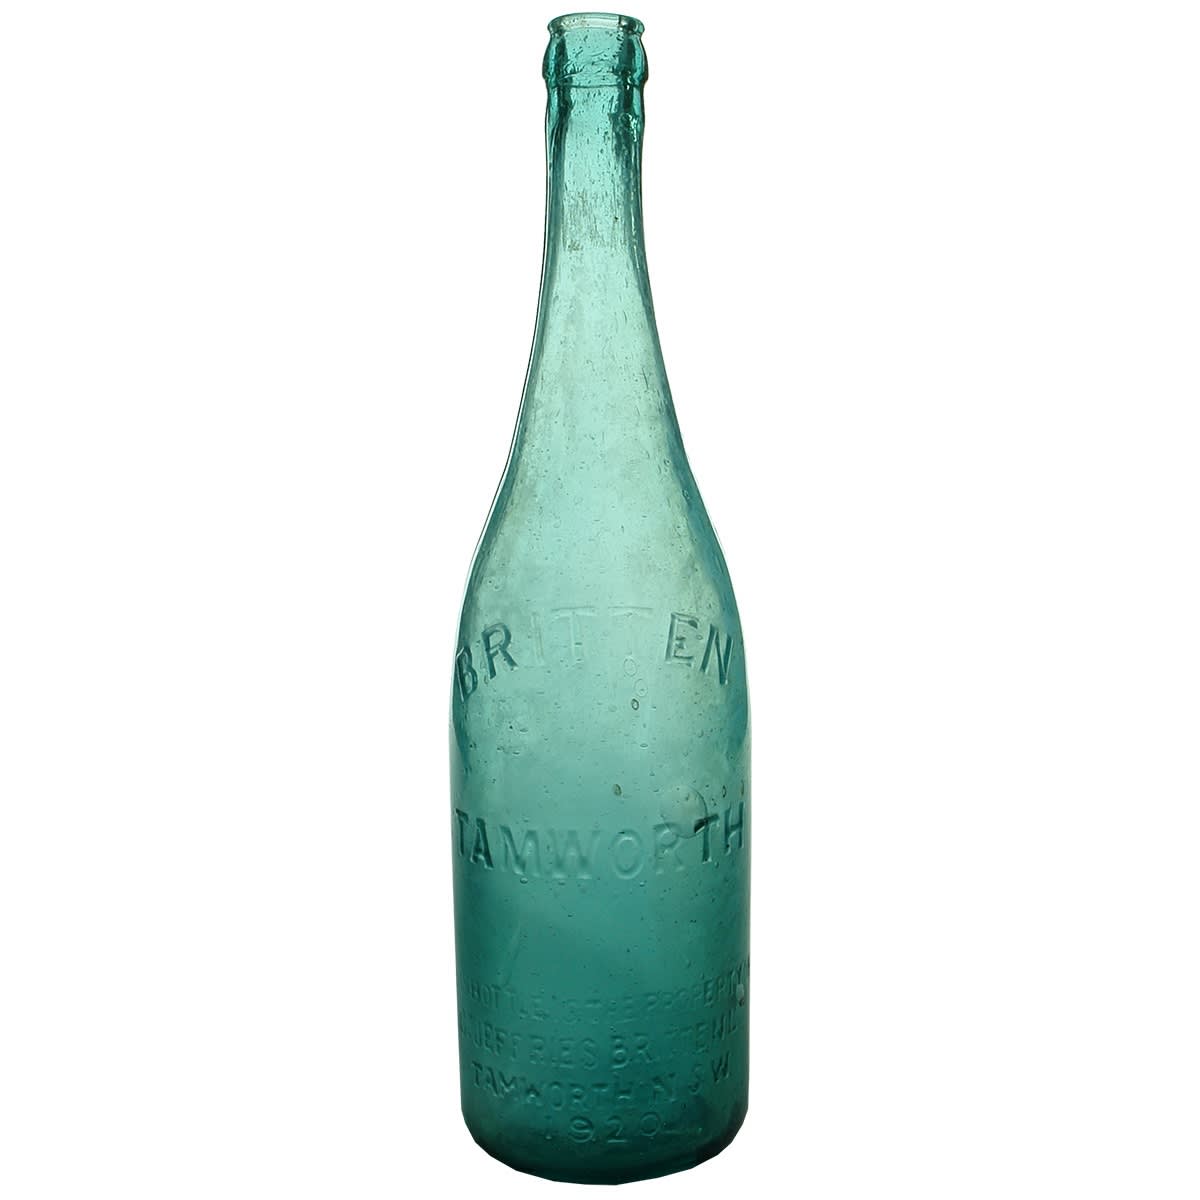 Crown Seal Beer. Britten, Tamworth. Blue Aqua. 1920. Spun finished top. (New South Wales)